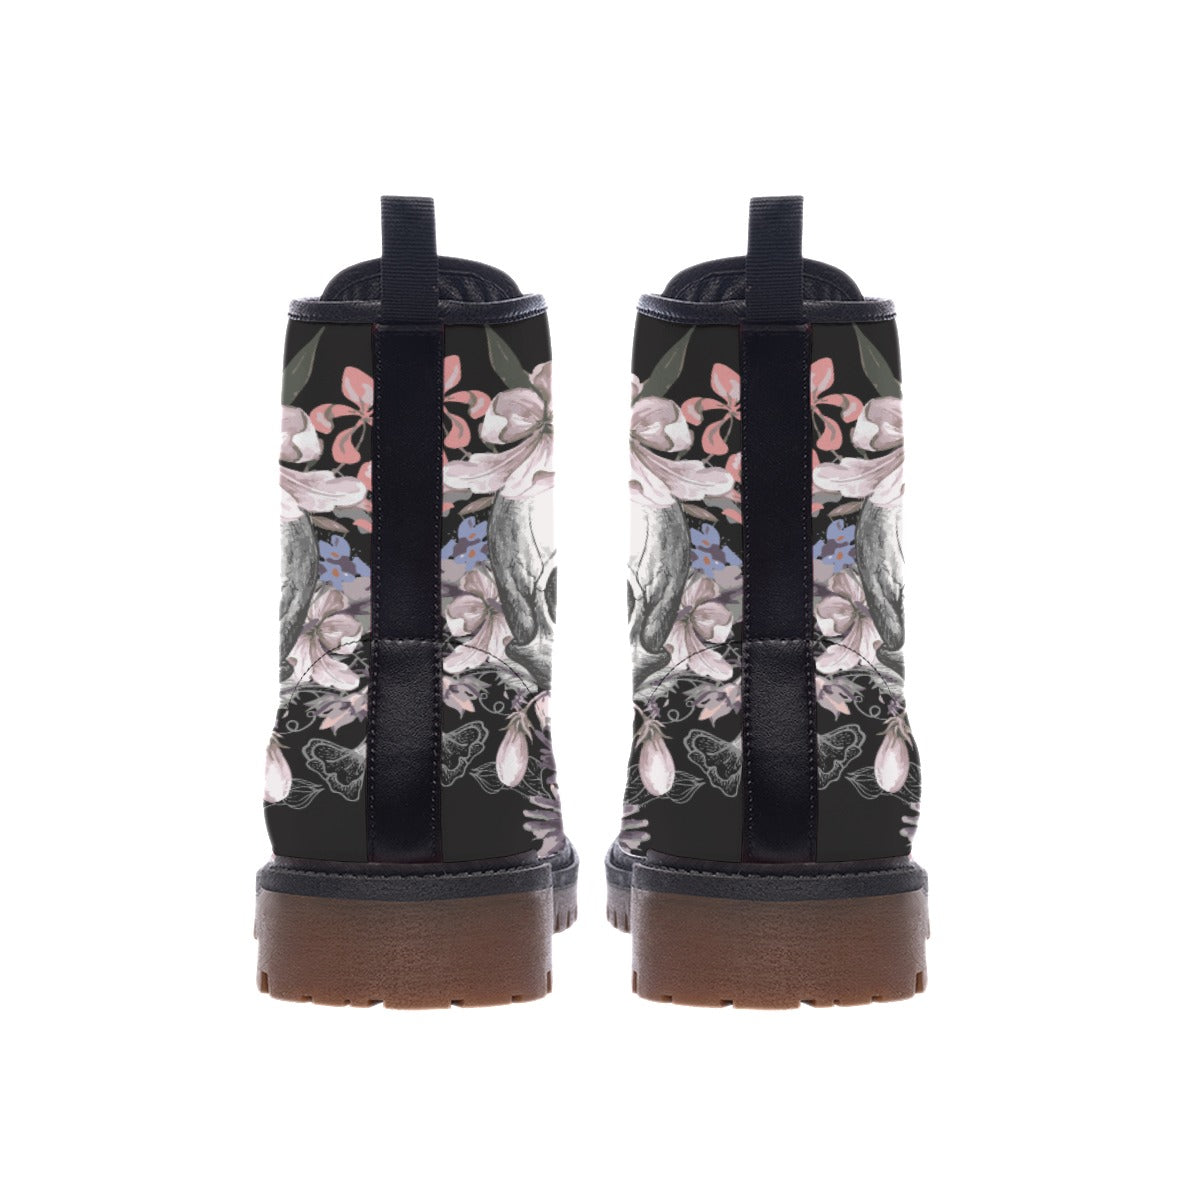 Floral skull men women Boots, Gothic skeleton halloween boots shoes Horror boots, skull shoes